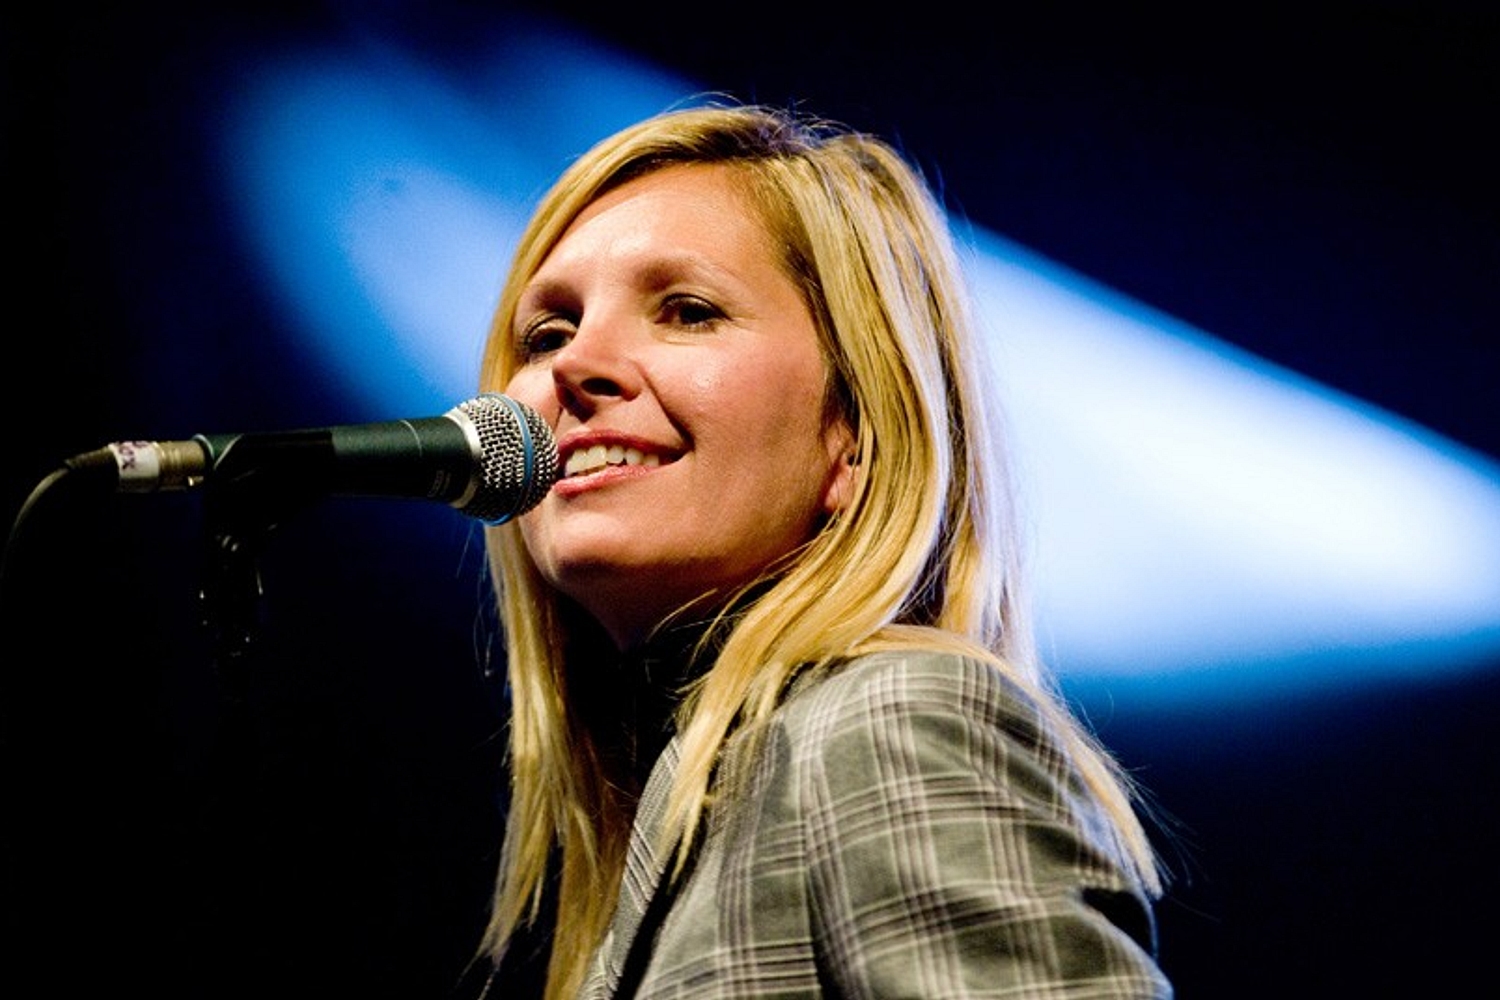 Saint Etienne’s Sarah Cracknell announces solo album ‘Red Kite,’ shares ‘On The Swings’